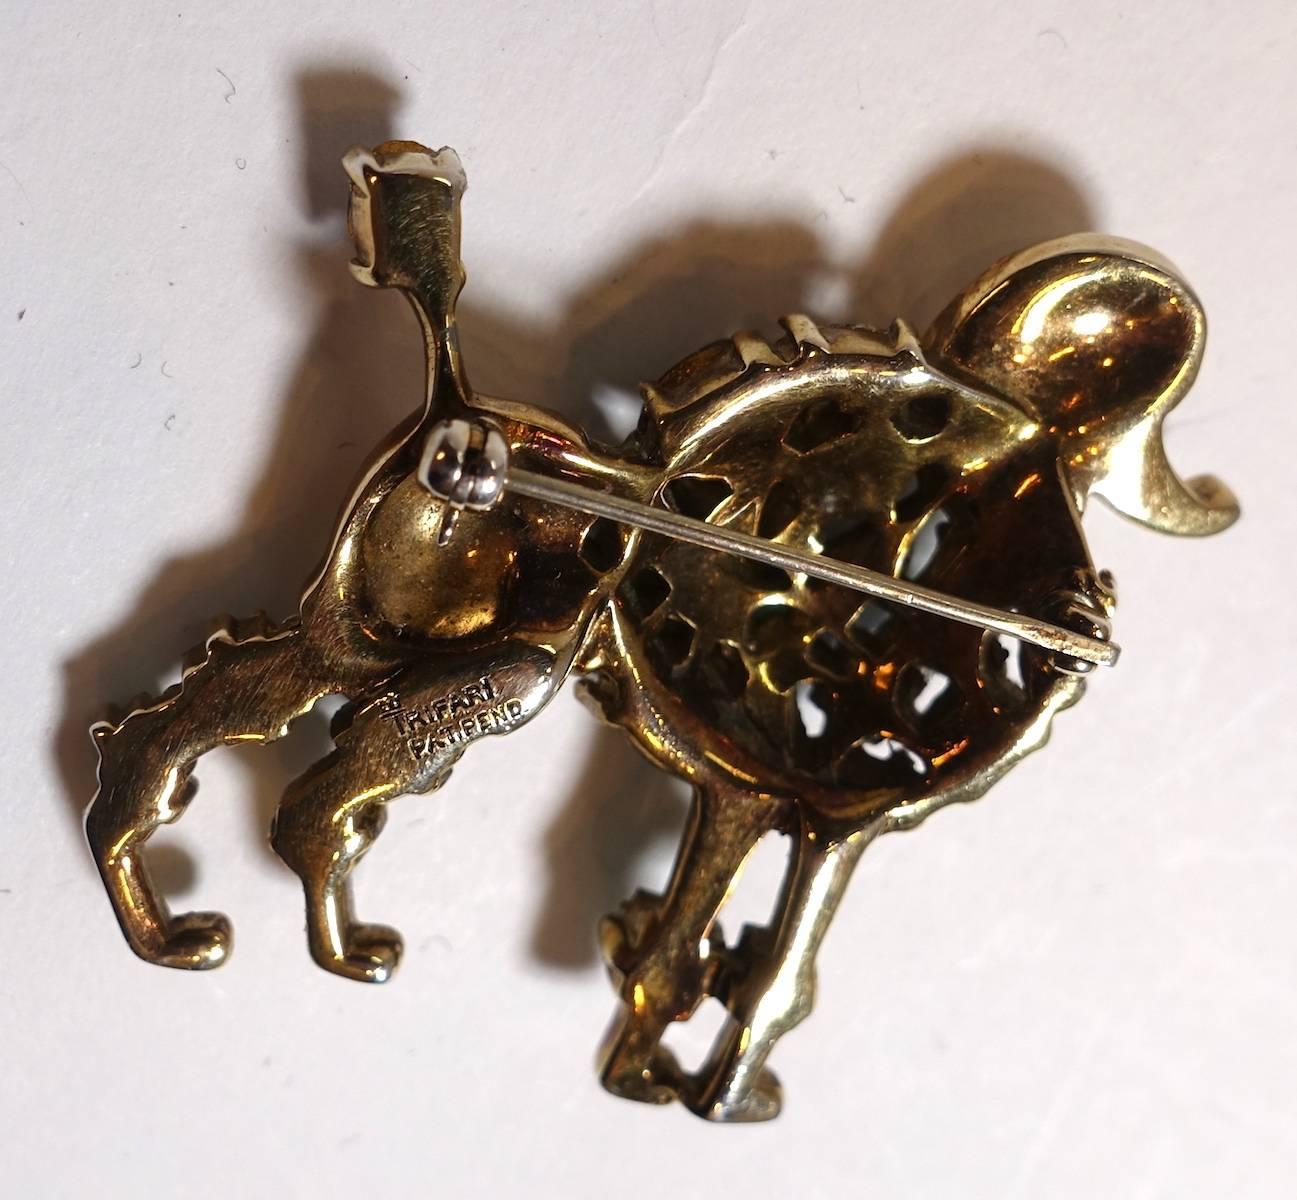 This famous vintage signed Trifari poodle brooch is designed multi-color crystals in sterling silver with a gold vermeil setting.  This brooch measures 1-3/4” x 1-3/4” and is signed with the crown over the T… “Trifari Sterling”.  It is in excellent